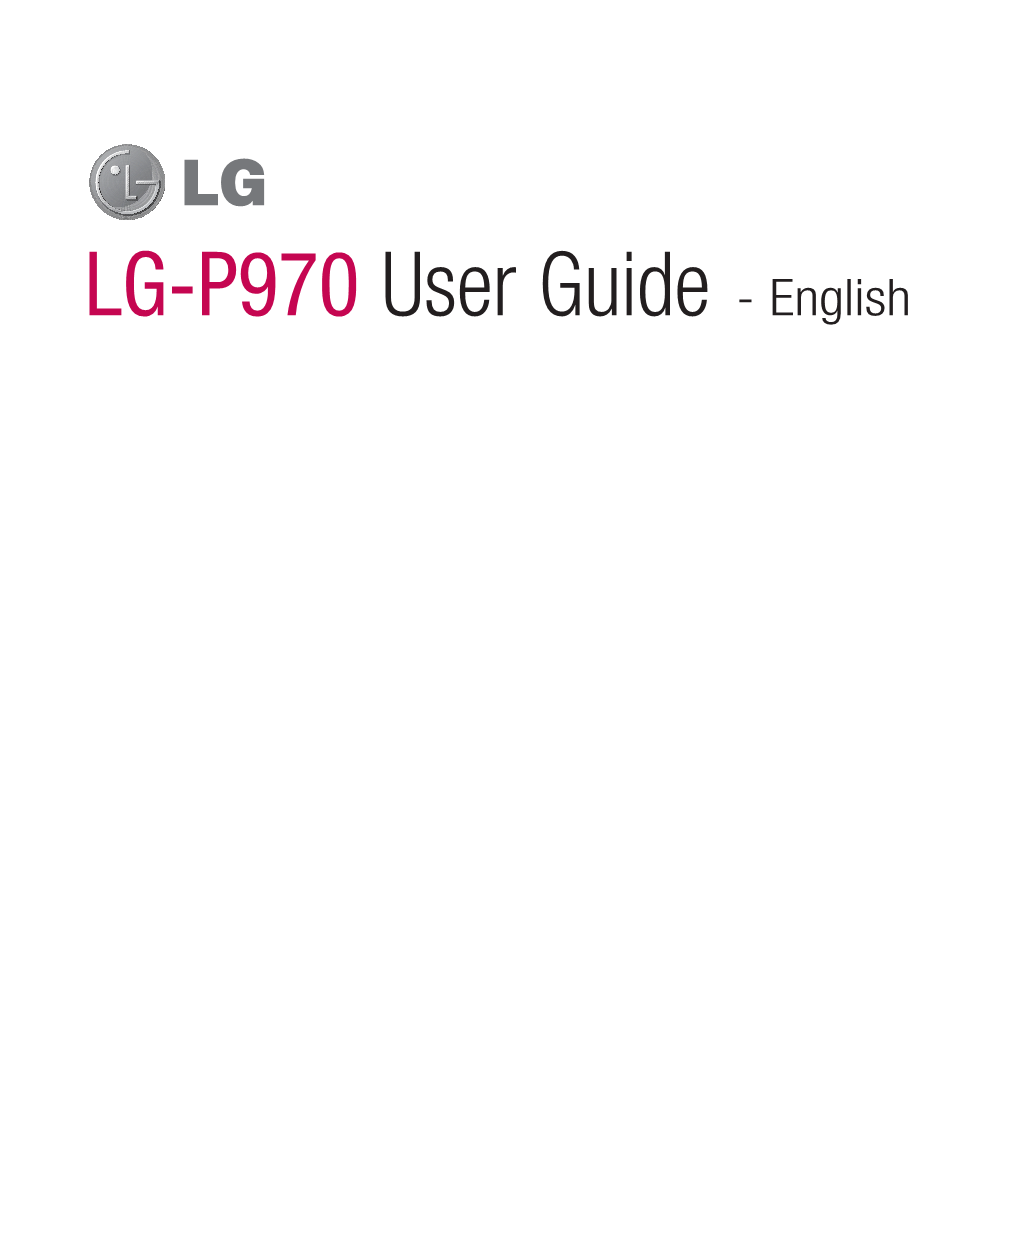 LG-P970 User Guide - English Contents Guidelines for Safe and Efﬁ Cient Lock Your Phone